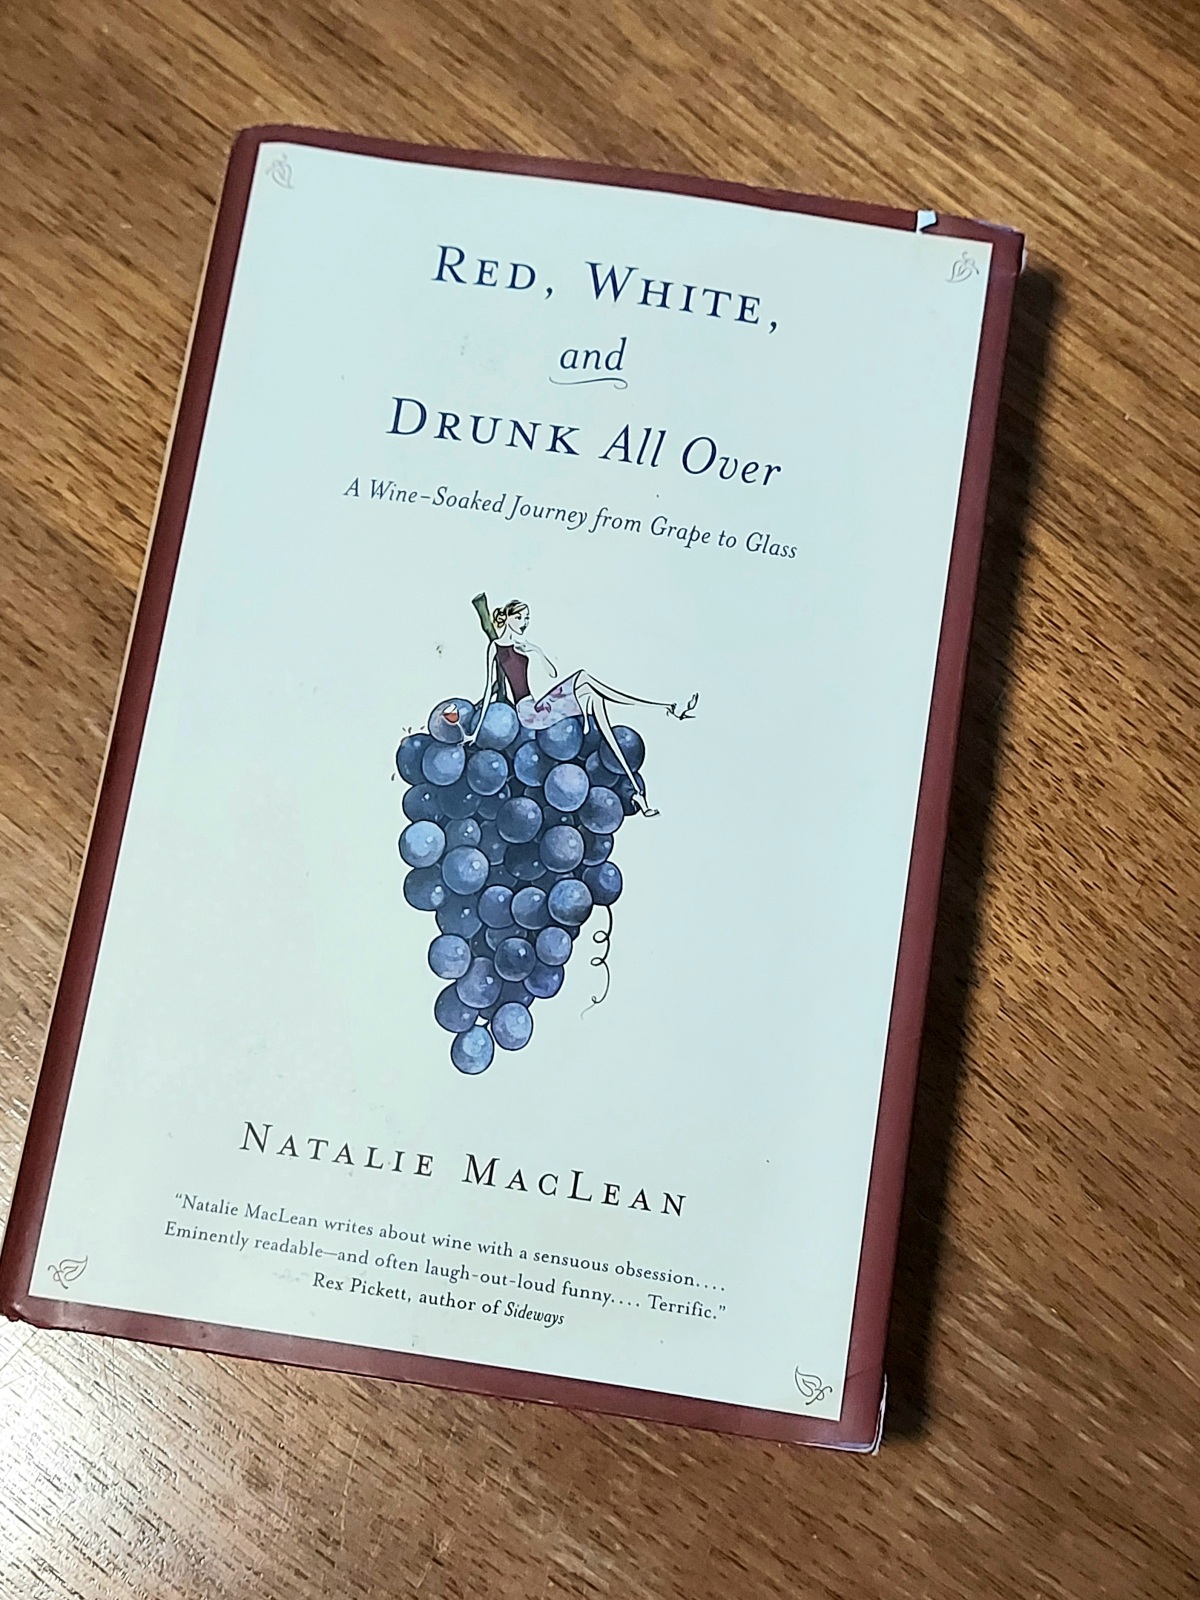 Red, White, and Drunk All Over: A Wine-Soaked Journey from Grape to Glass